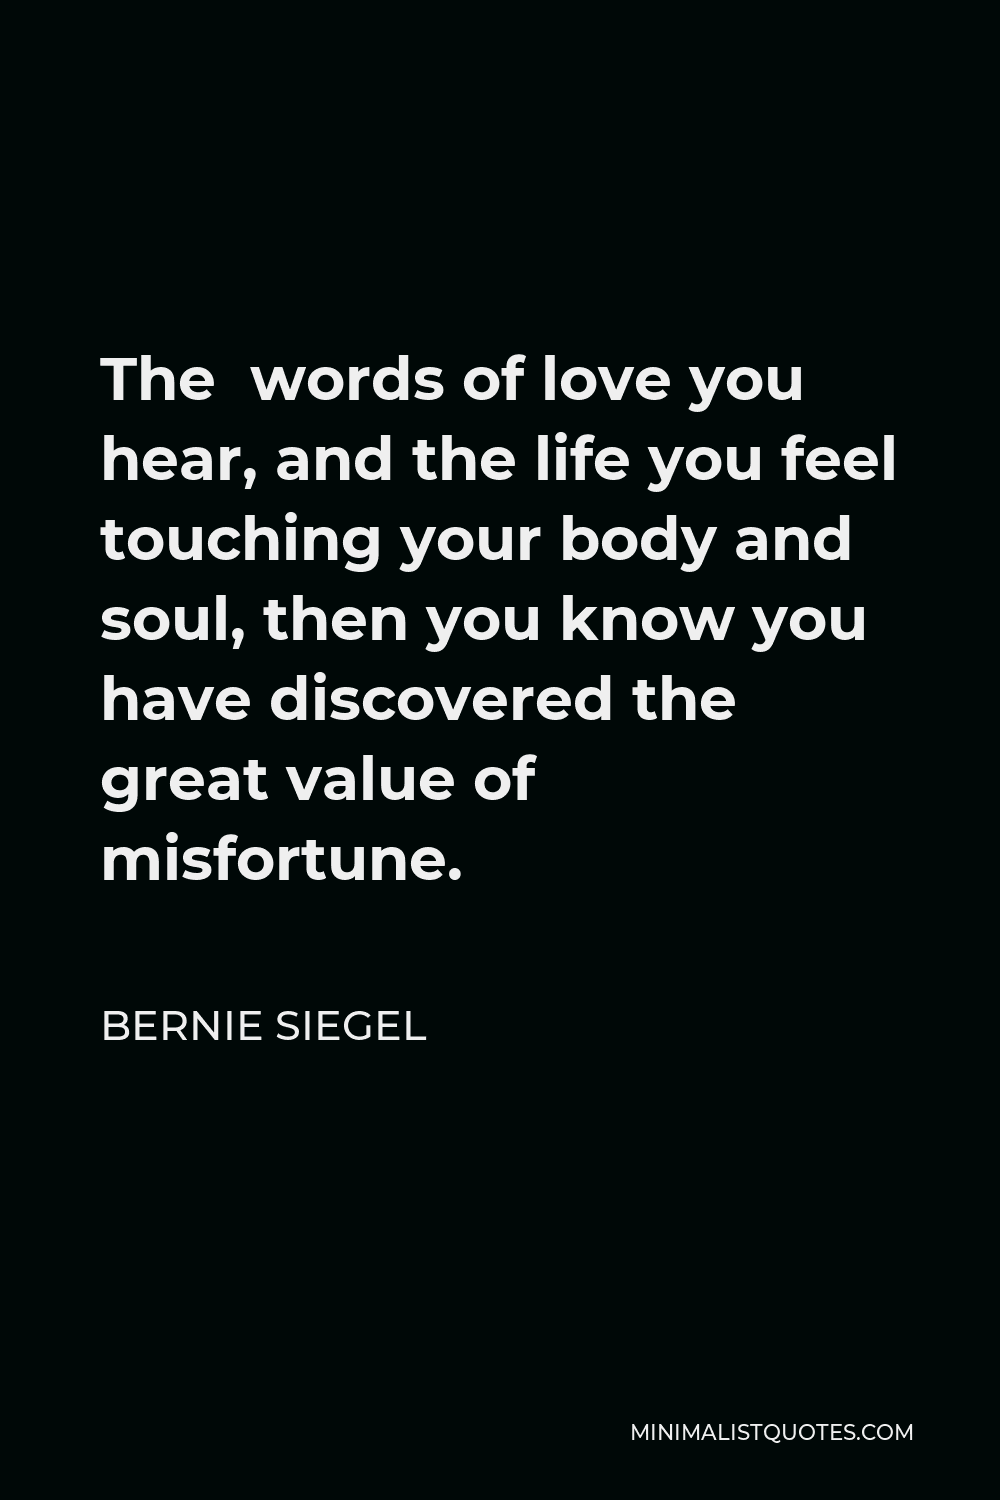 Bernie Siegel Quote - The words of love you hear, and the life you feel touching your body and soul, then you know you have discovered the great value of misfortune.